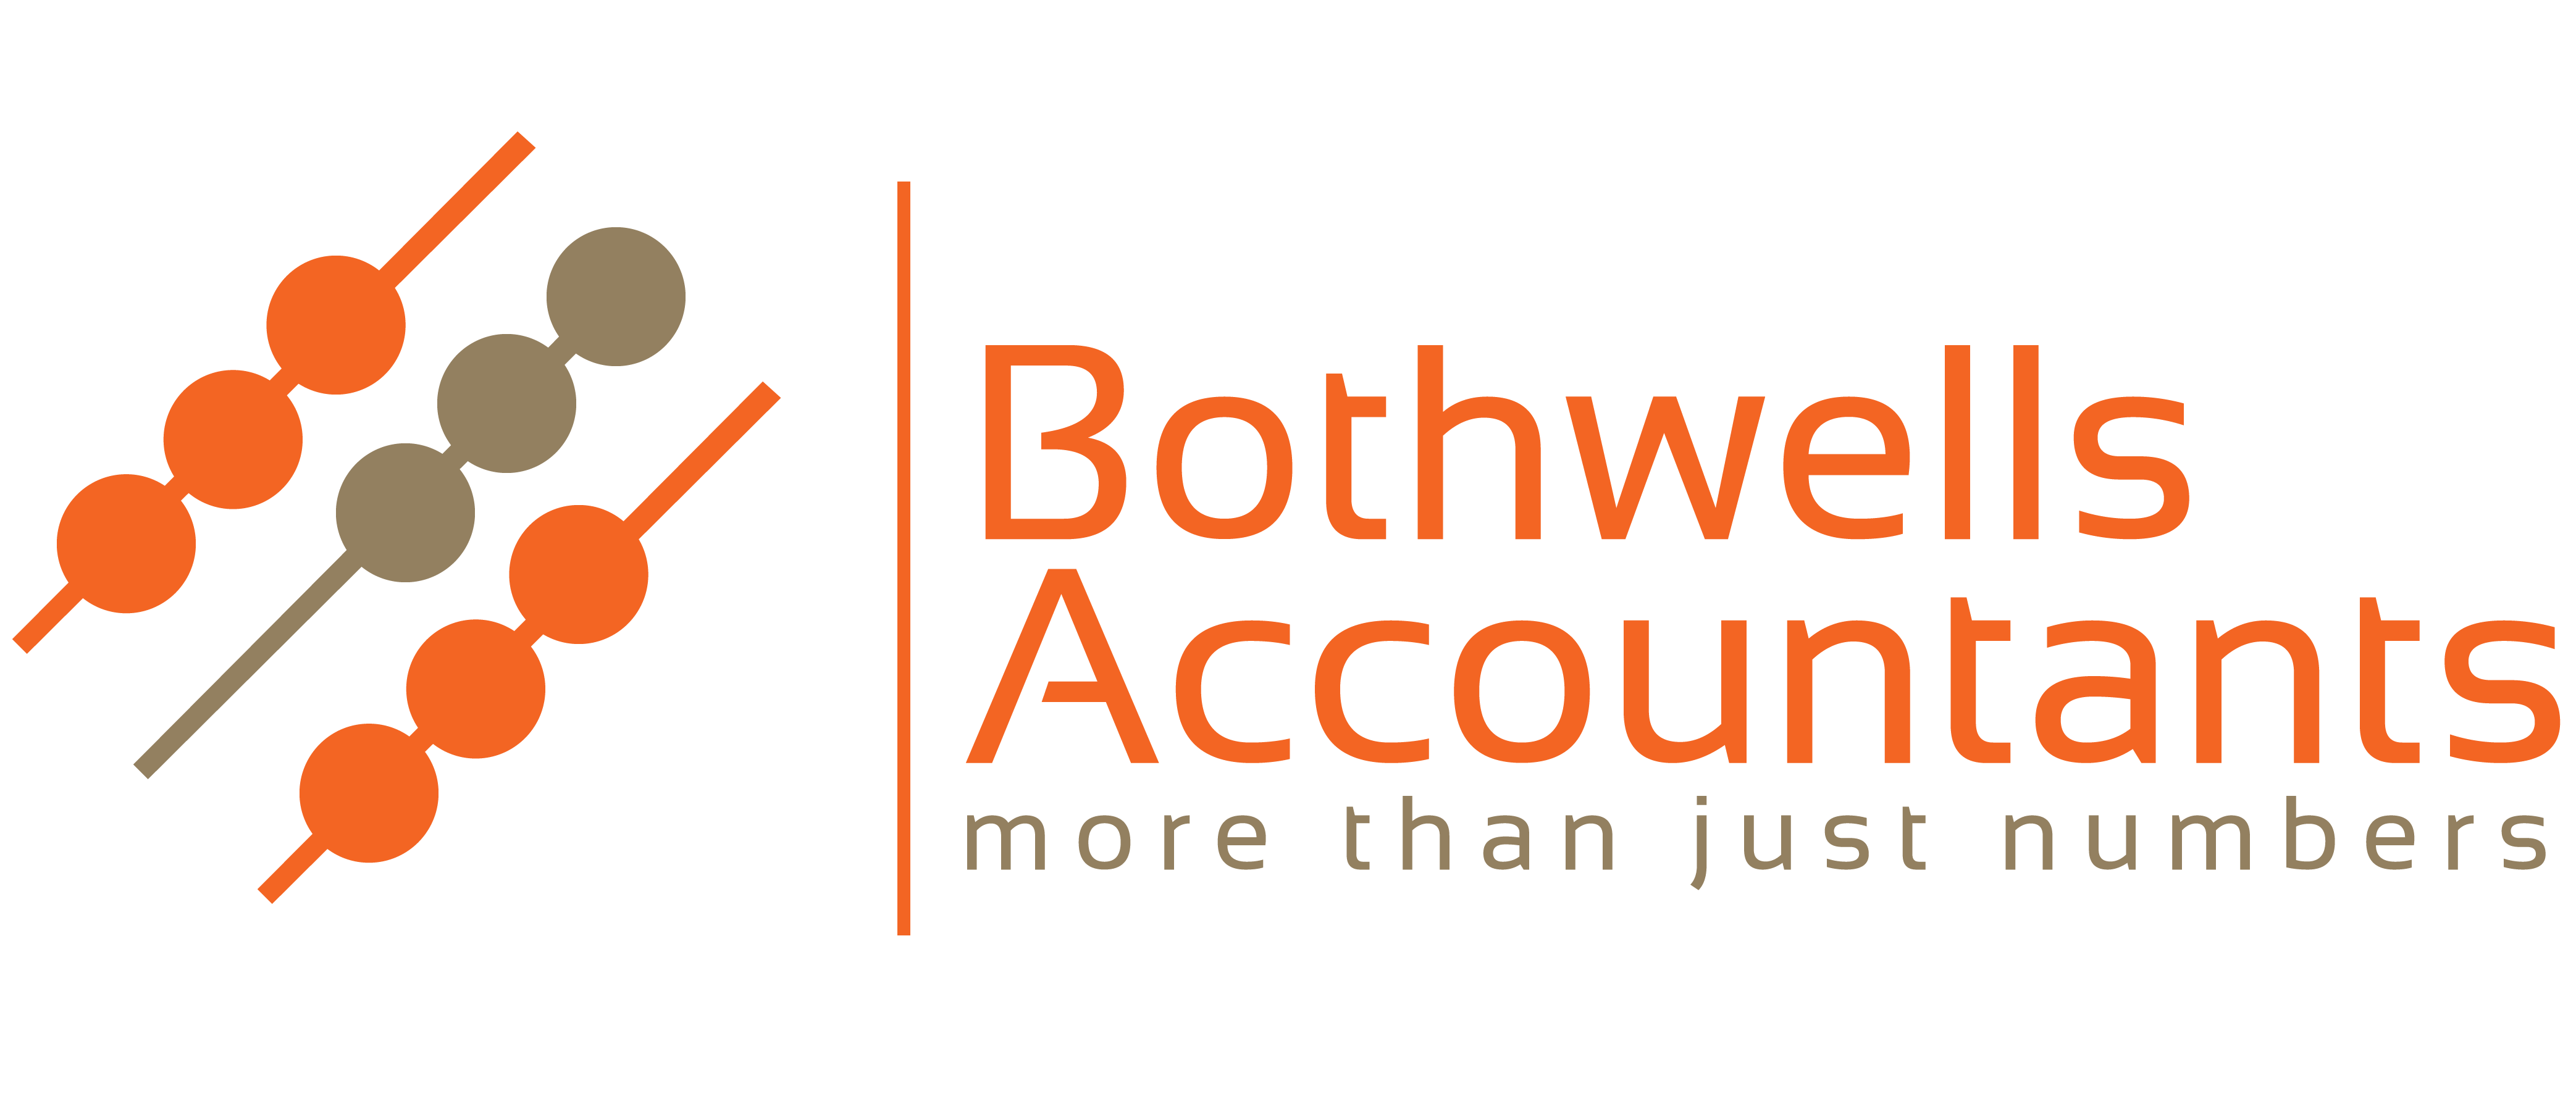 Bothwells Accountants - More than just numbers